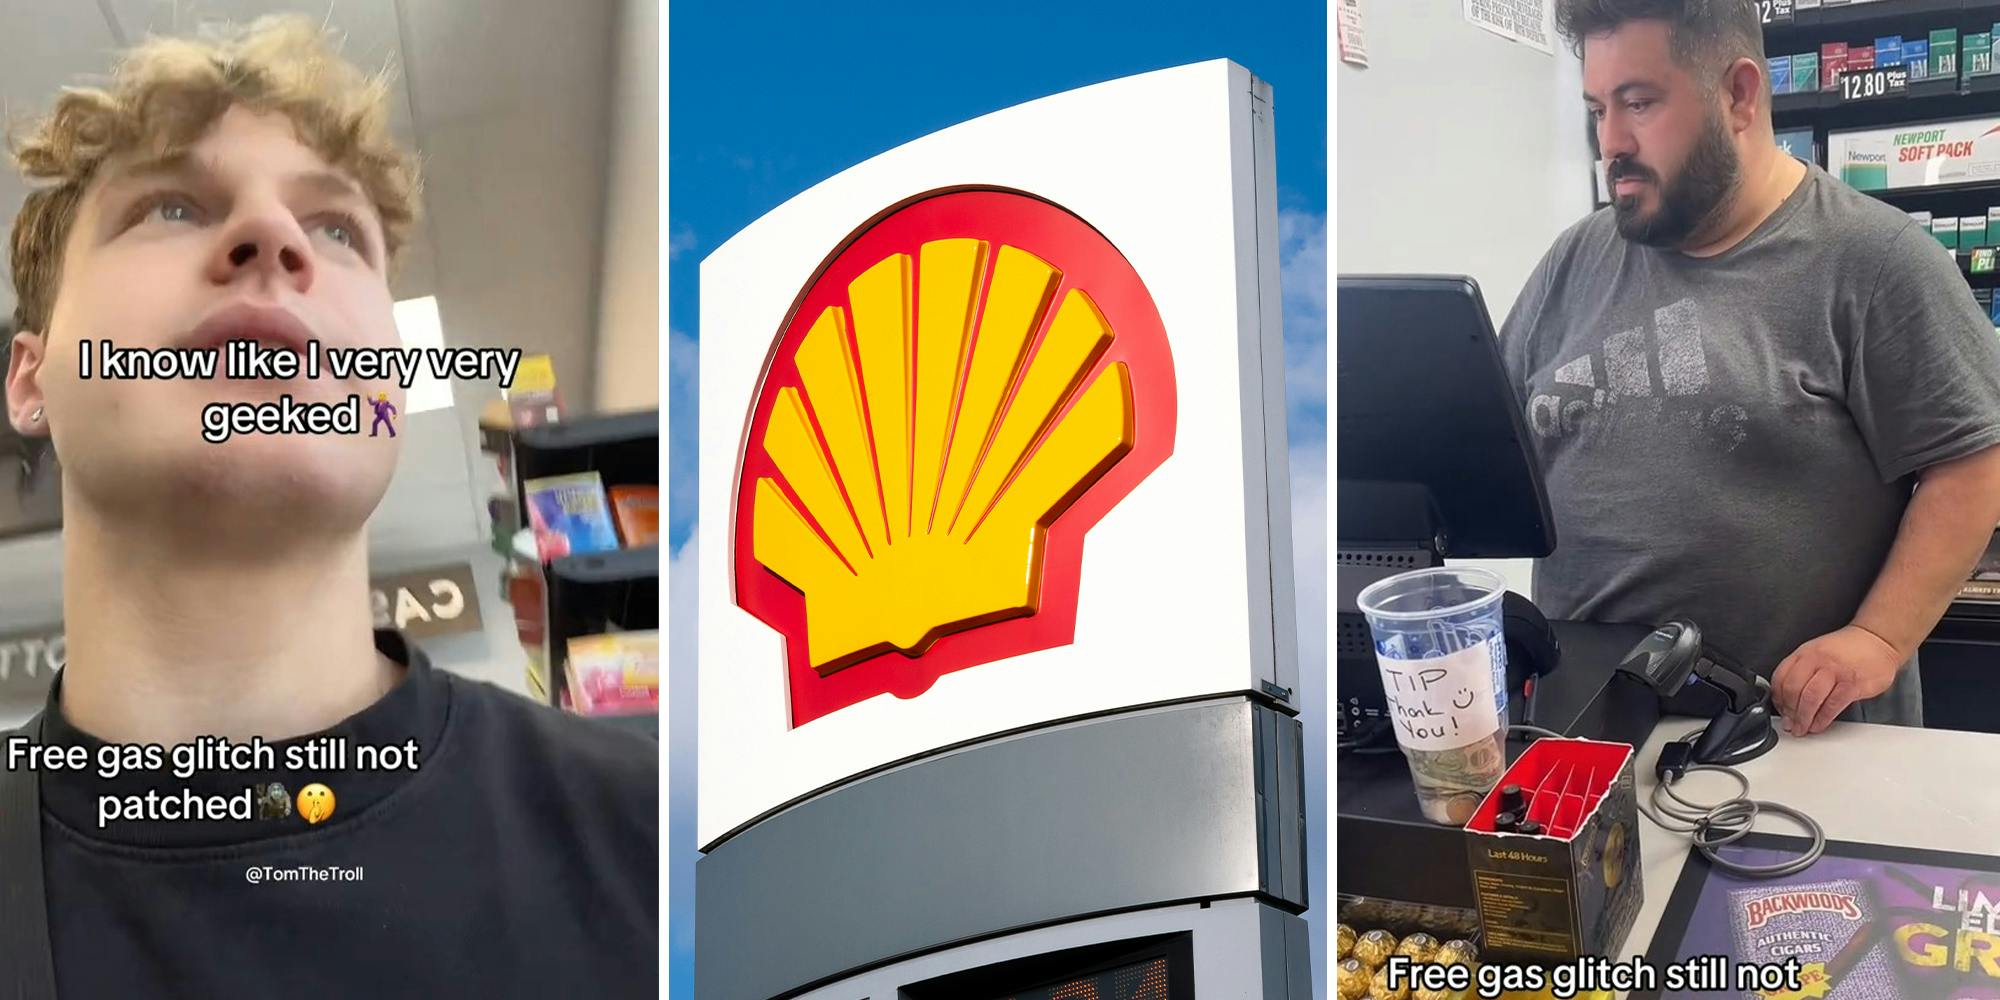 Shell customer pays with 1 penny, gets ‘free’ gas